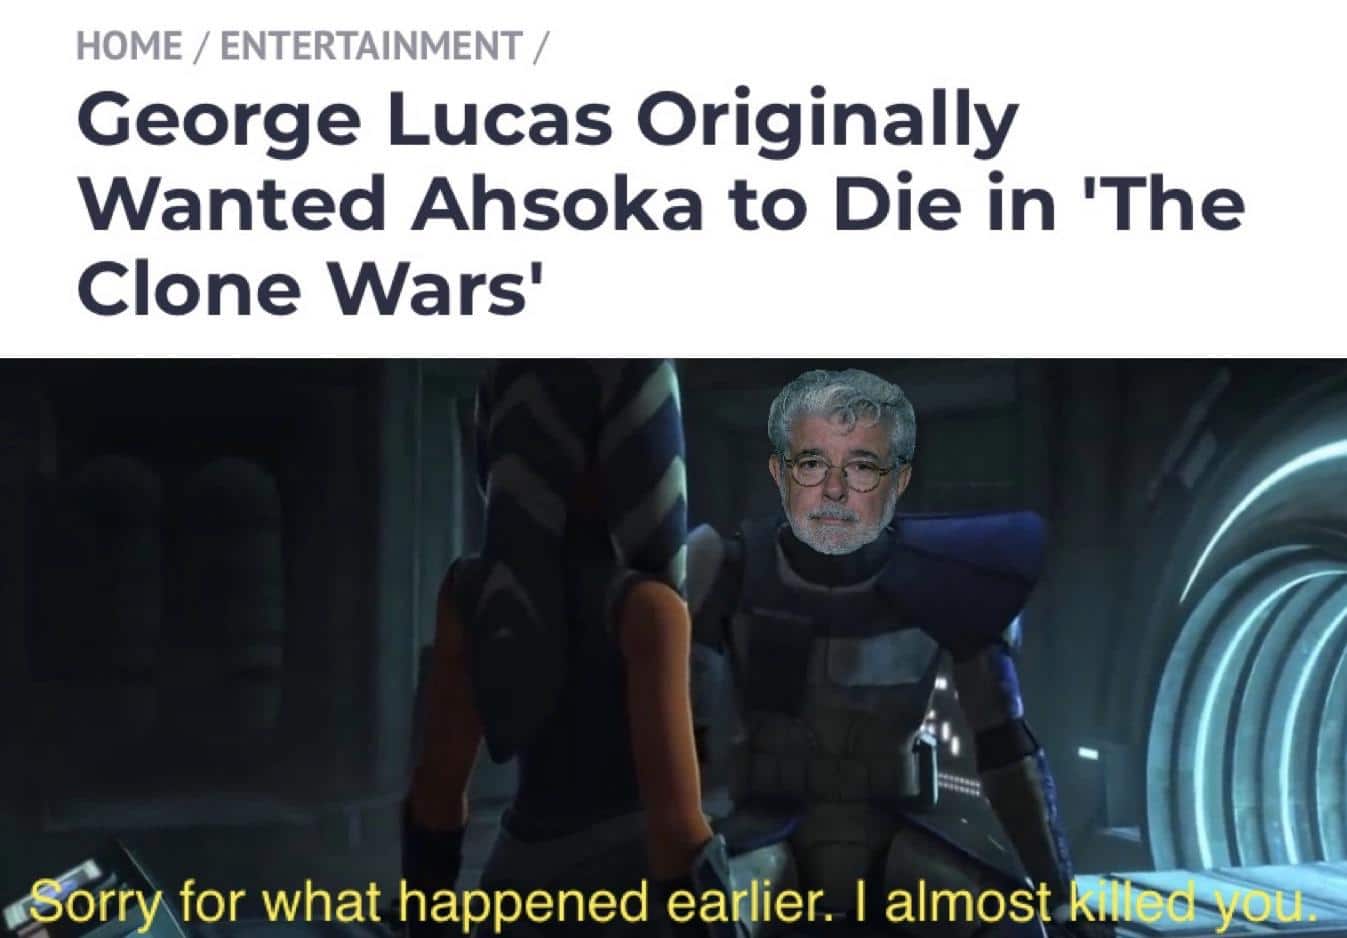 Prequel-memes, Ahsoka, Jedi, Rebels, Vader, Star Wars Star Wars Memes Prequel-memes, Ahsoka, Jedi, Rebels, Vader, Star Wars text: HOME / ENTERTAINMENT / George Lucas Originally Wanted Ahsoka to Die in I The Clone Wars' sry\for what happened ea iere I almost 